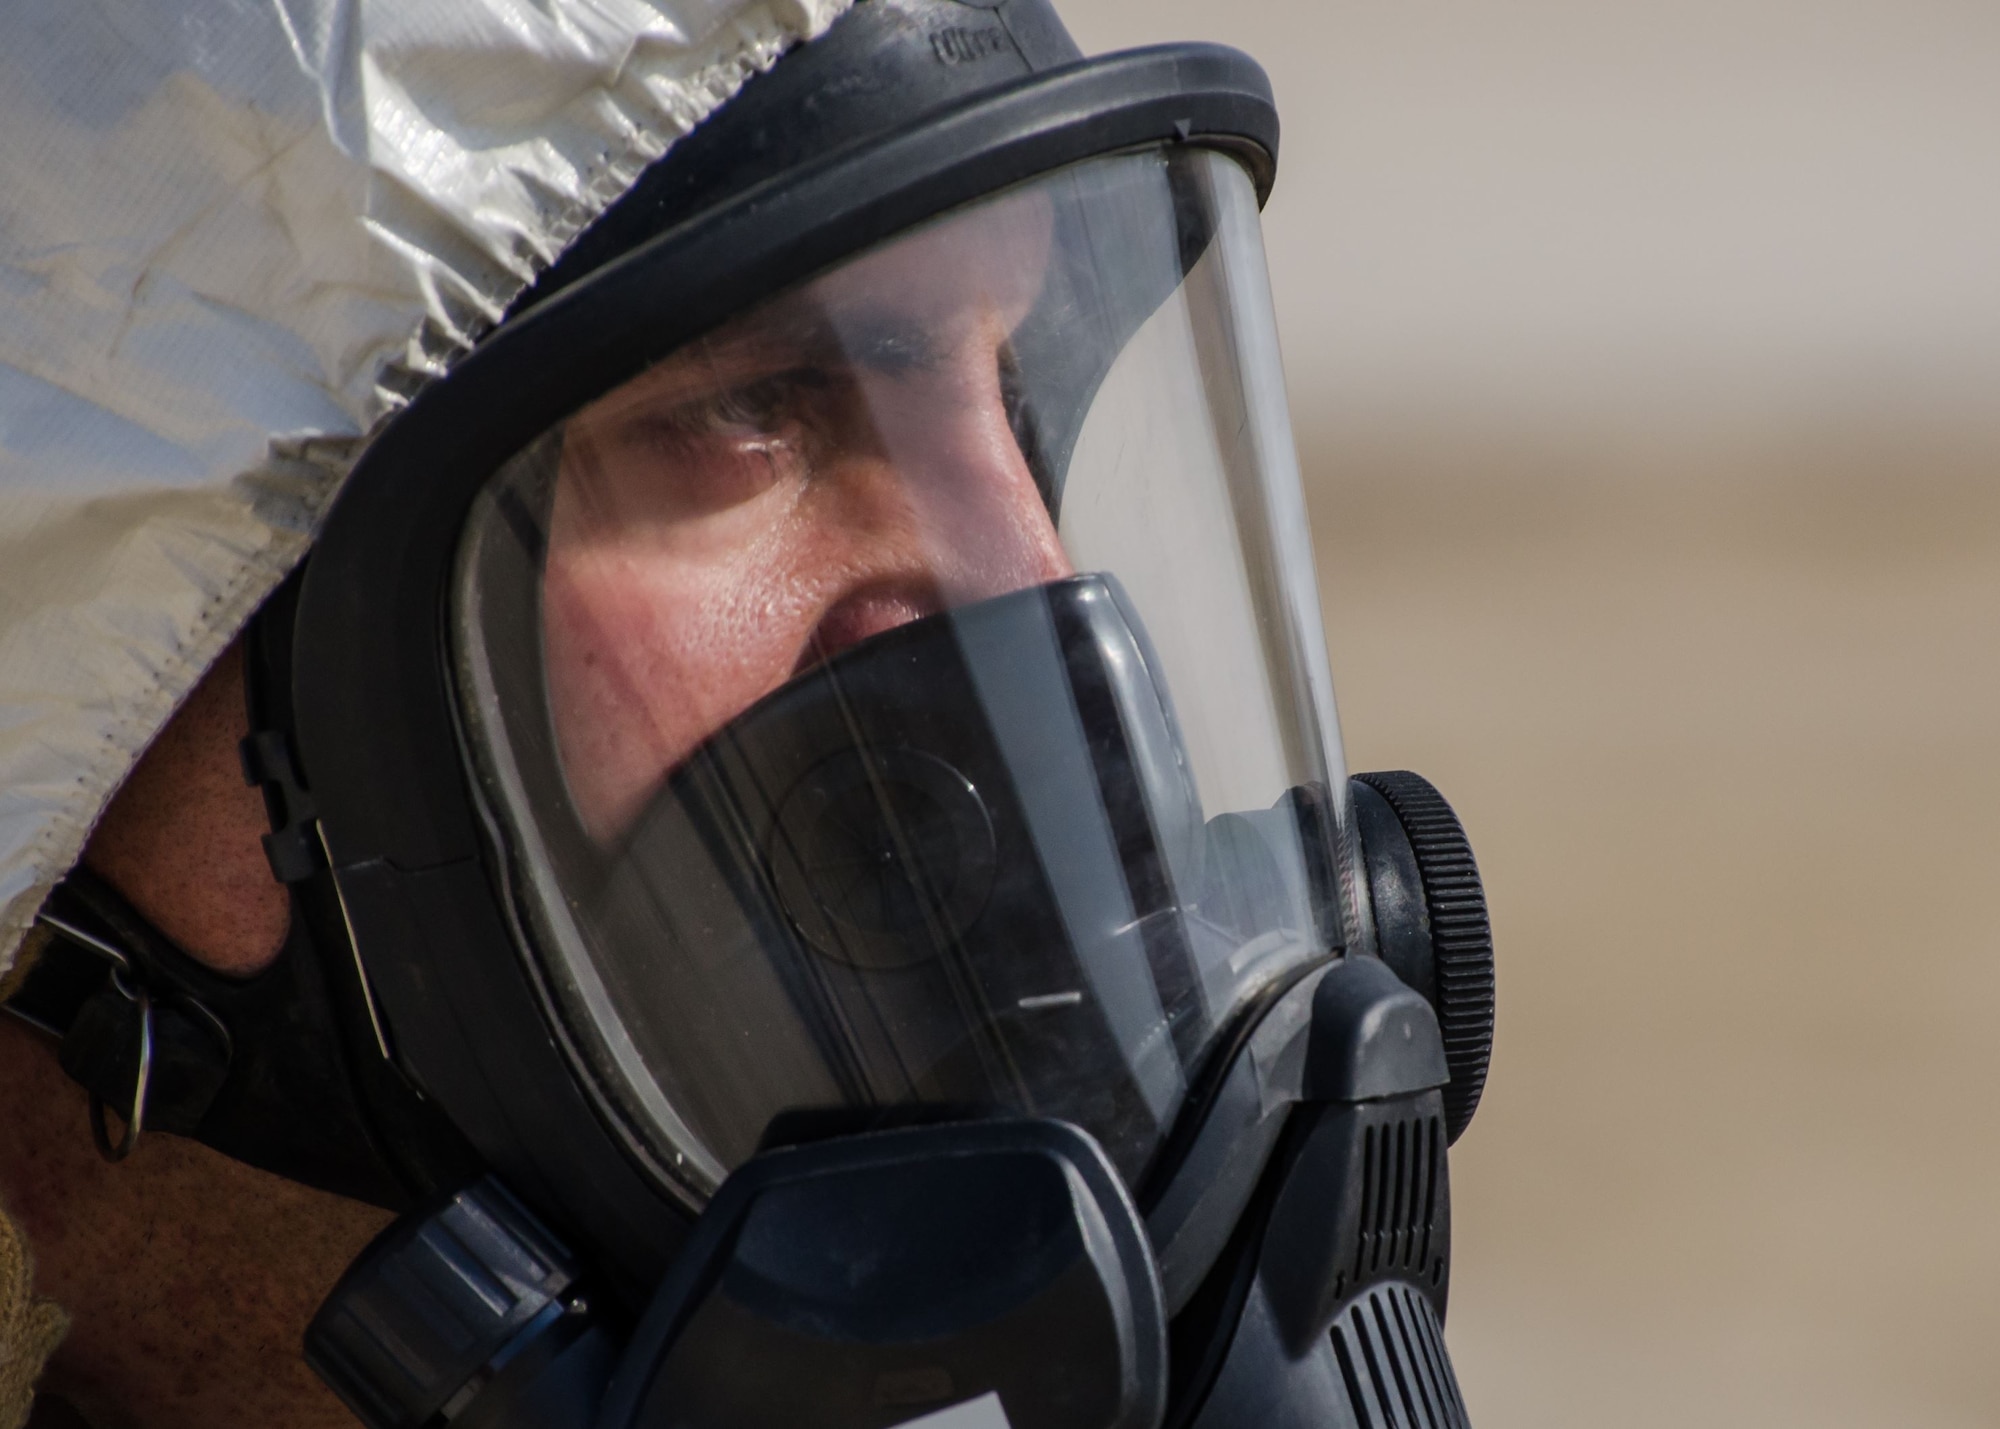 Tech Sgt. Charles Piccolomini, 380th Expeditionary Civil Engineer Squadron, explosive ordnance disposal, logistics section chief, observers the scene of an F-22 Raptor crash during the base-wide Major Accident Response Exercise at Al Dhafra Air Base, United Arab Emirates Dec. 15, 2017. EOD is trained to detect, disarm, detonate and dispose of explosive threats. (U.S. Air National Guard Photo by Staff Sgt. Colton Elliott)